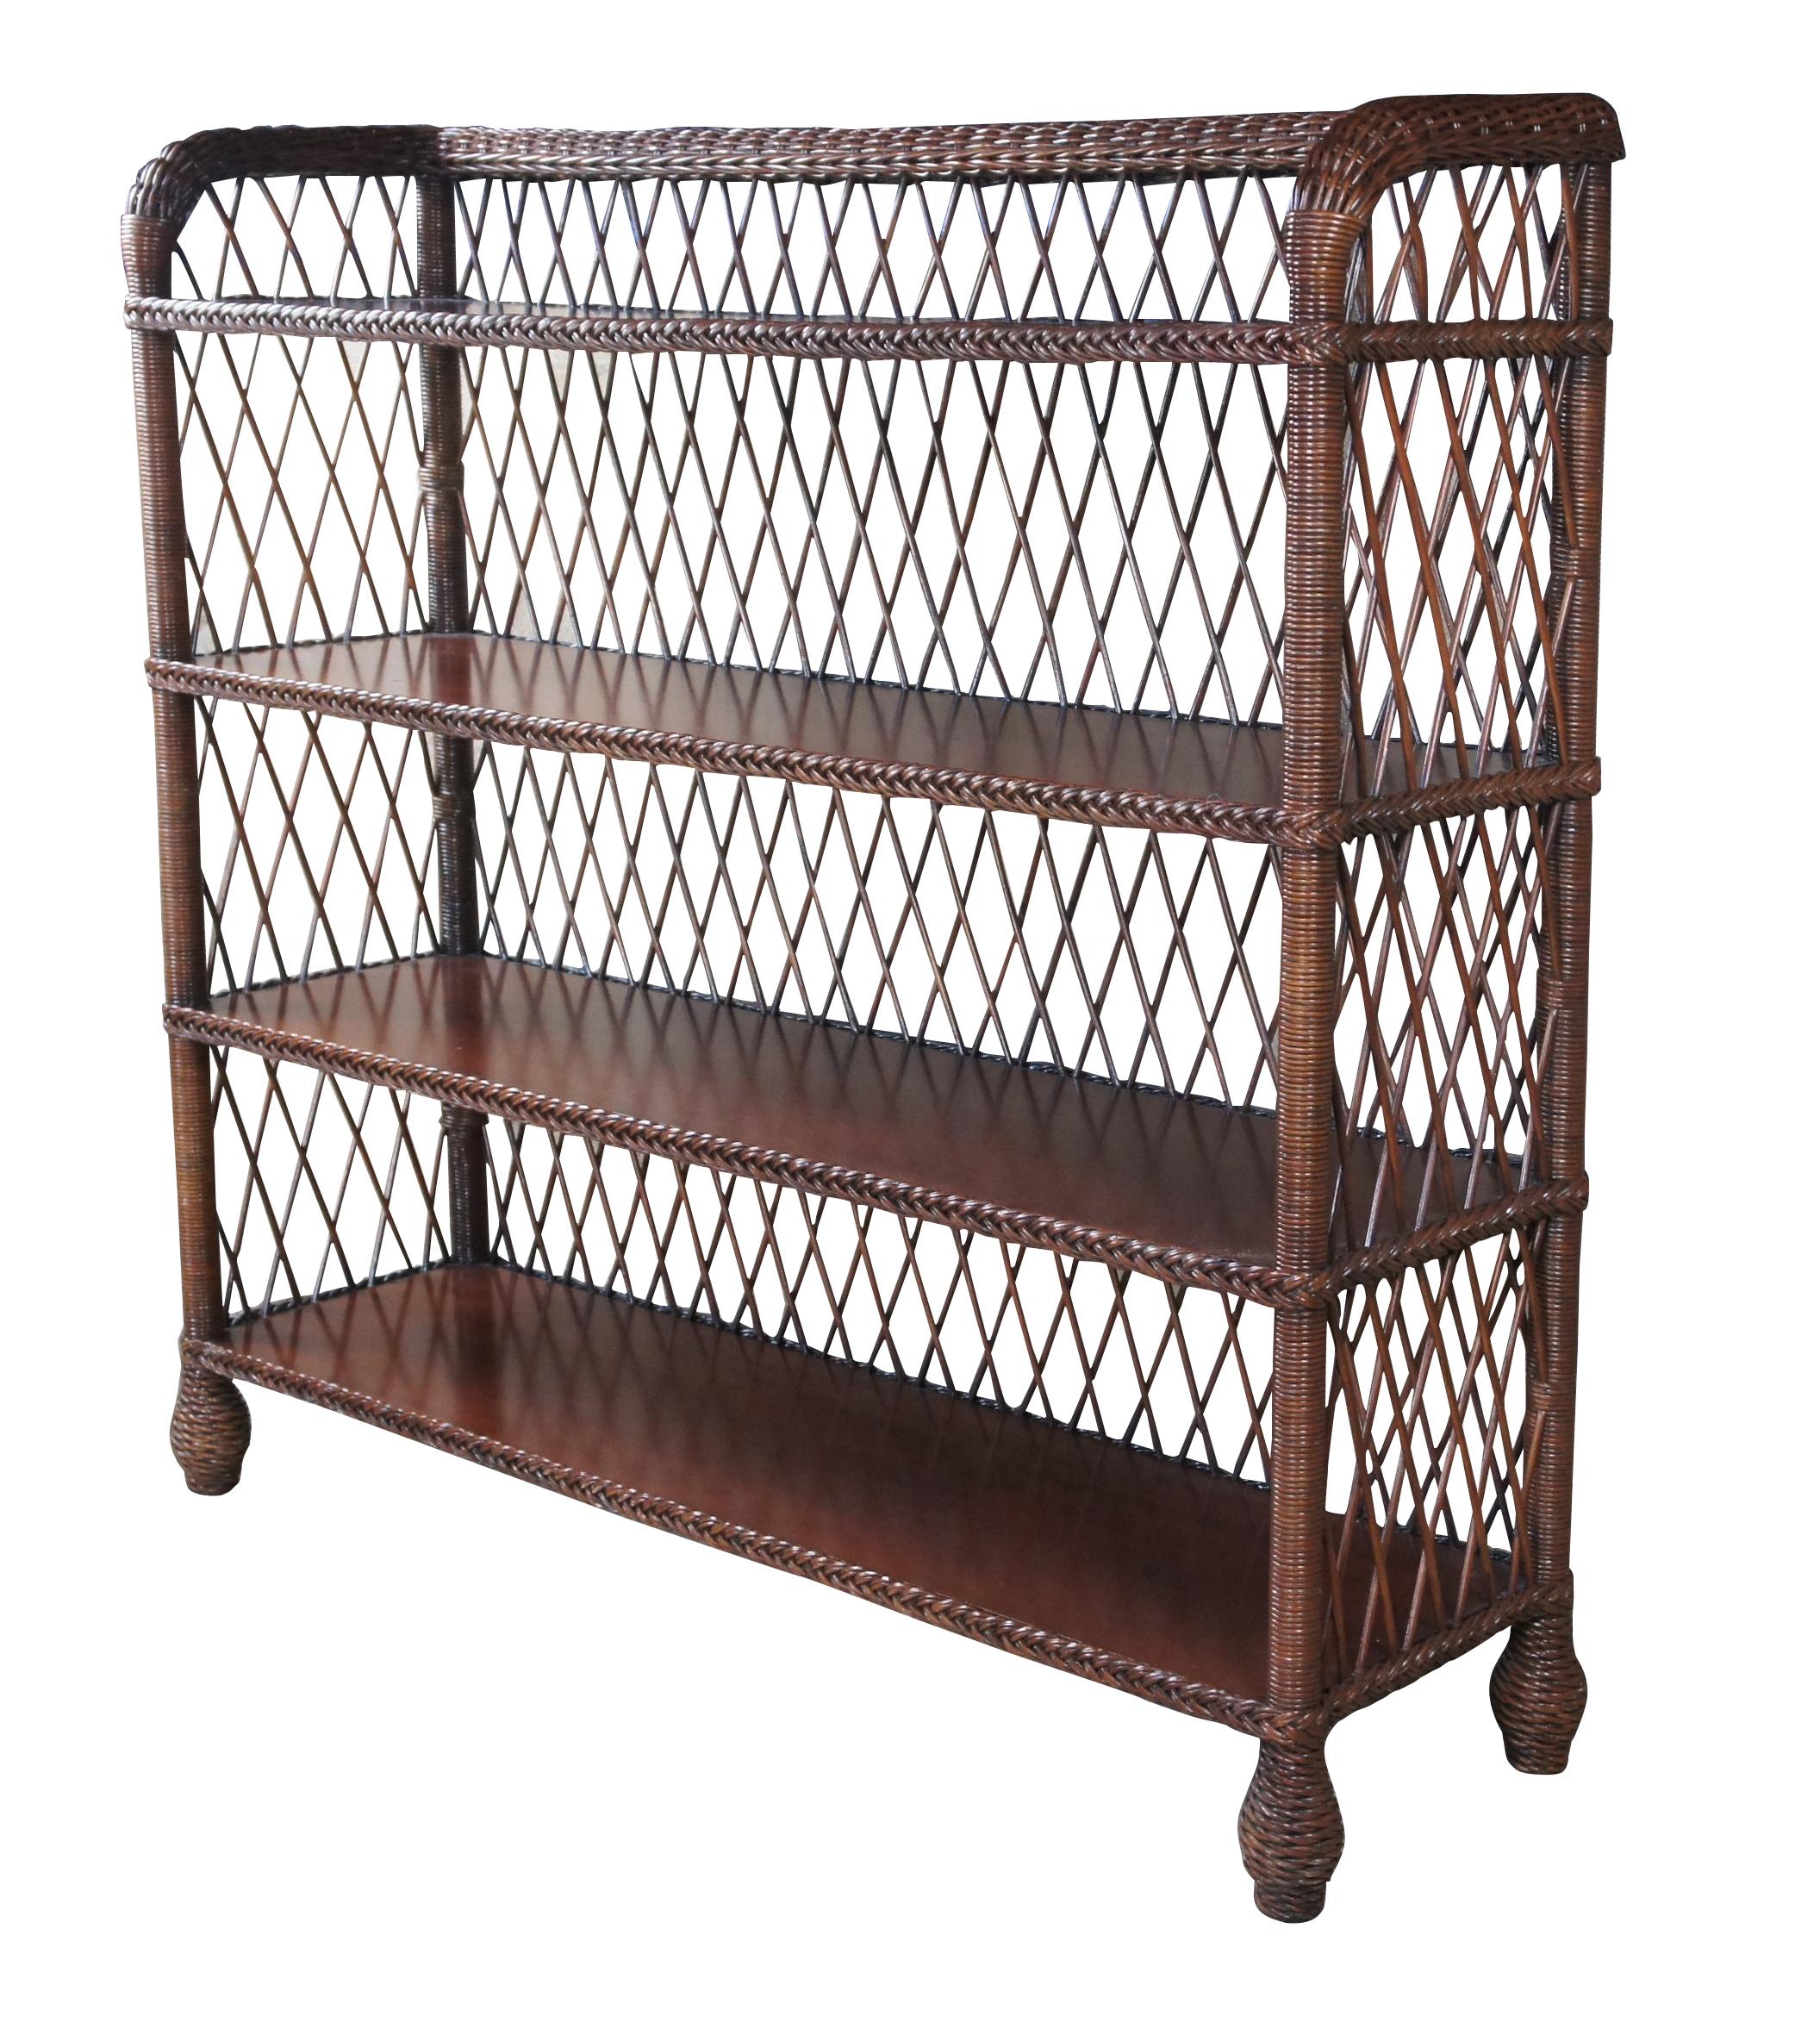 The Conservatory Bookcase by Ralph Lauren is a Modern Bohemian take on Late Victorian and Edwardian styling. Made from Mahogany and braided wicker with lattice back and sides. Includes four shelves over bun feet. 
 
In 1983 Ralph Lauren Home